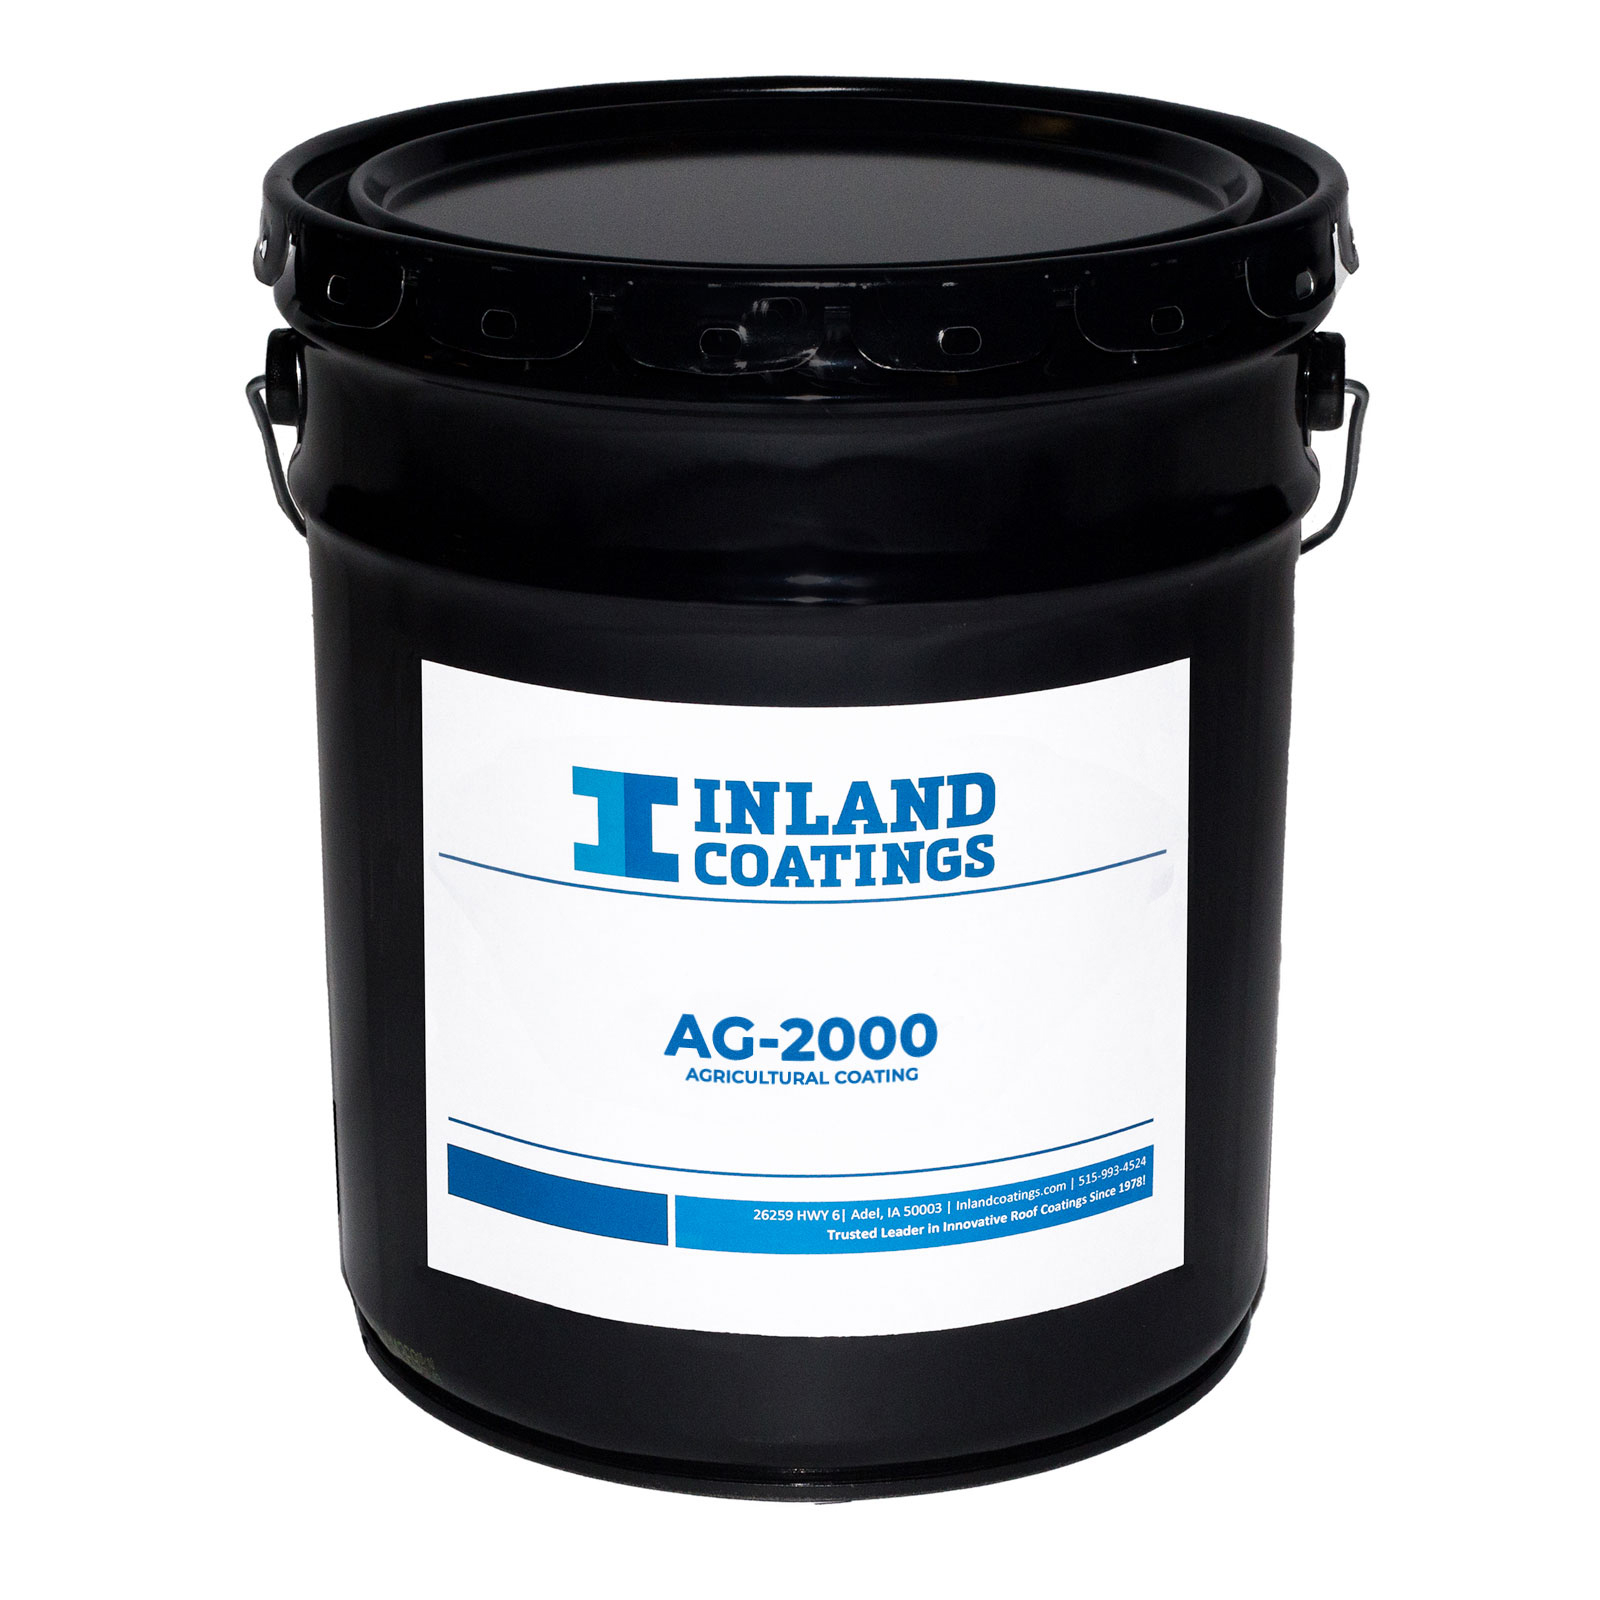 A bucket of Inland's AG-2000 Single Component Agricultural Coating